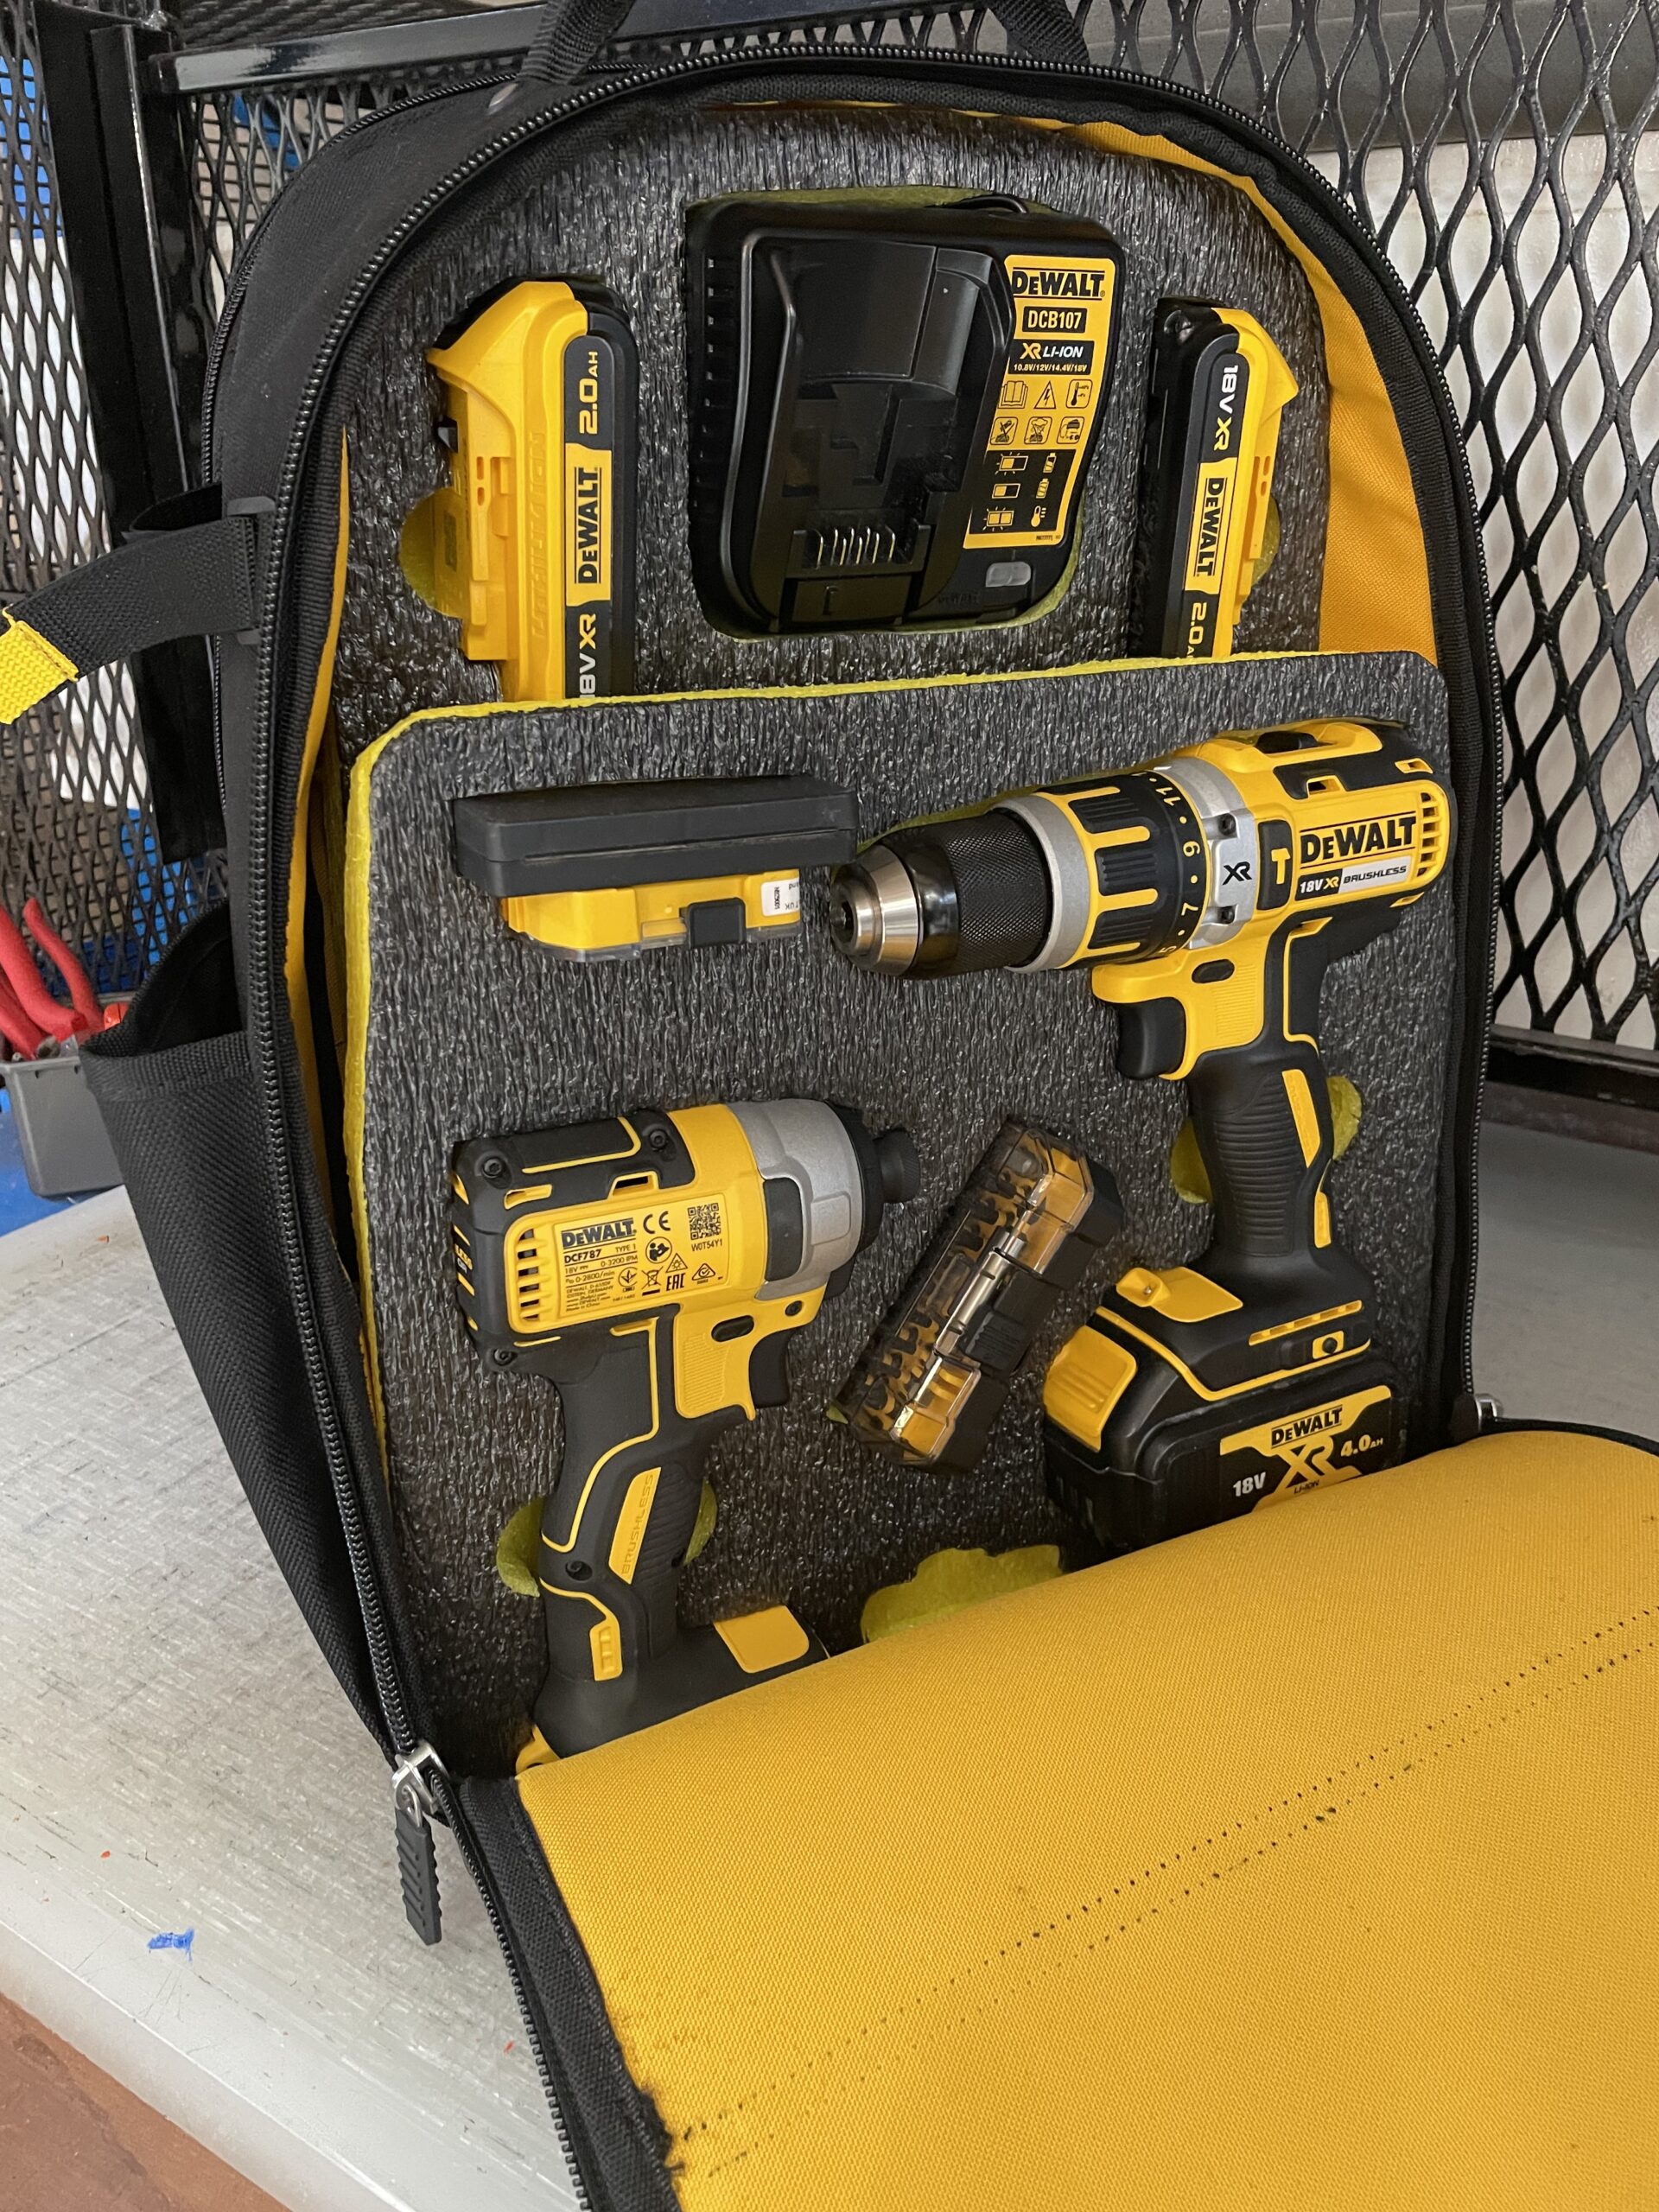 the finished Dewalt tool bag - what do you think of our upgrade?